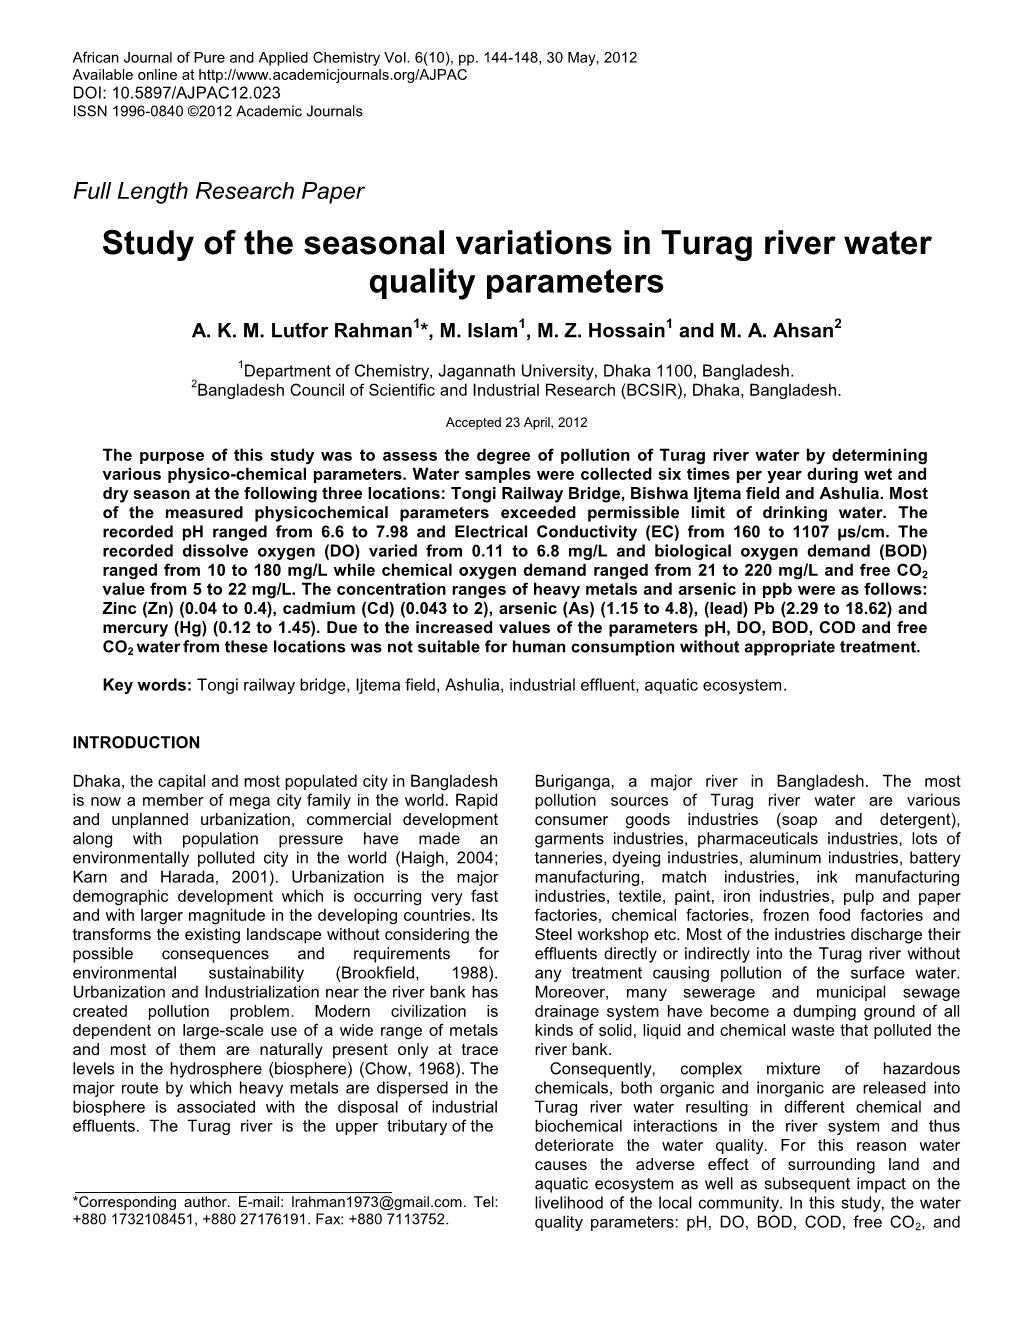 Study of the Seasonal Variations in Turag River Water Quality Parameters